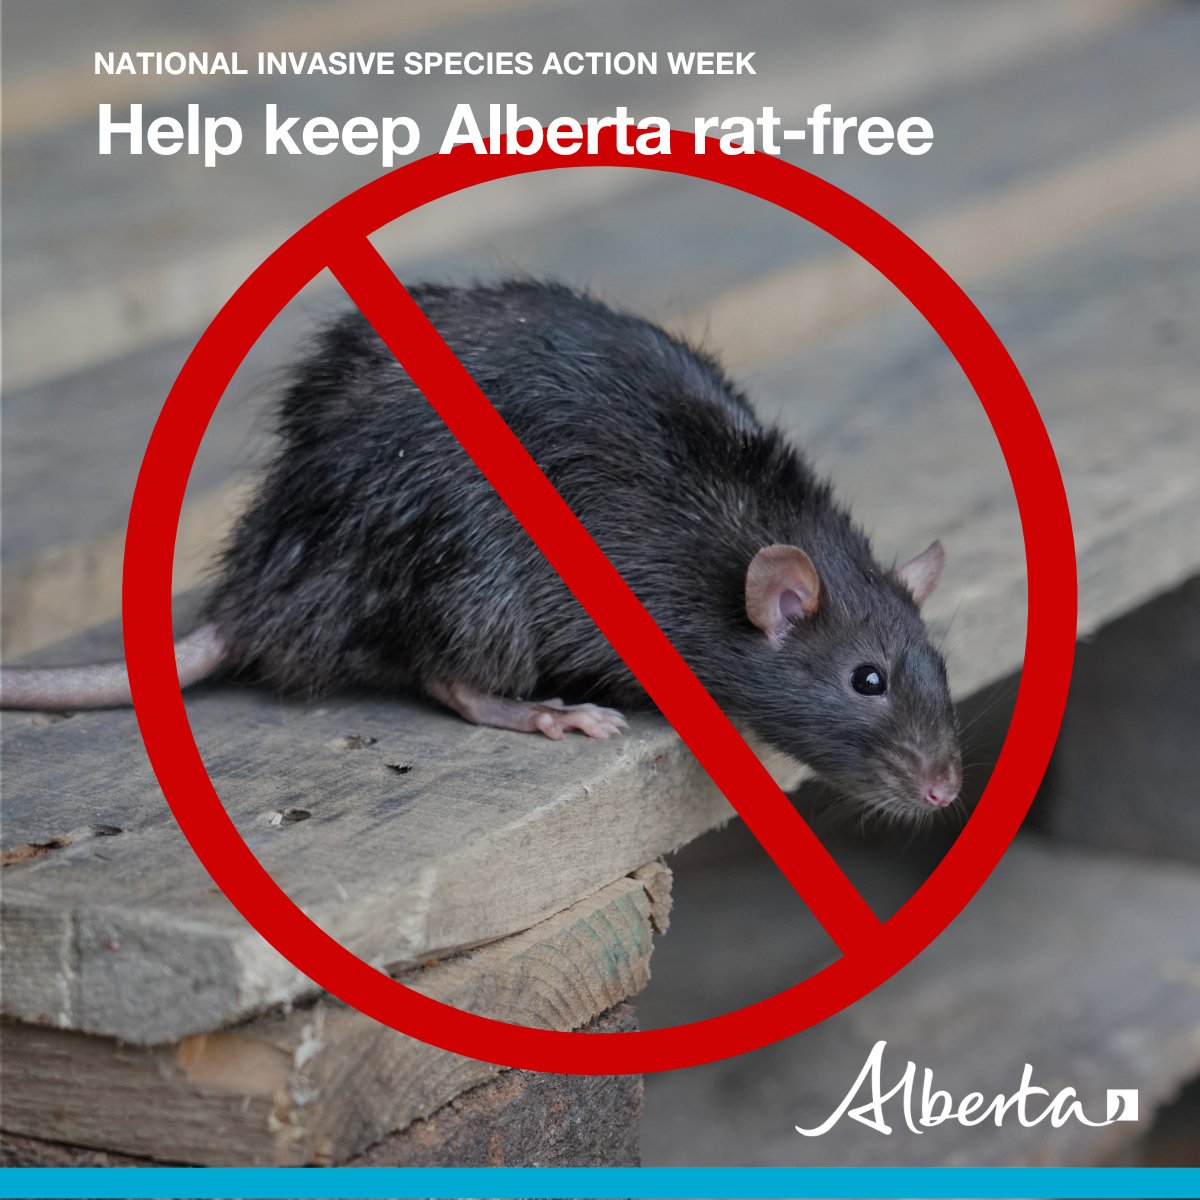 Since 1950, Alberta has been the only rat-free province in Canada. 

Let’s keep it that way! If you see any signs of them in your field, barn or anywhere else – report them by calling 310-FARM or emailing 310rats@gov.ab.ca 🚫🐀

#abag #NISAW